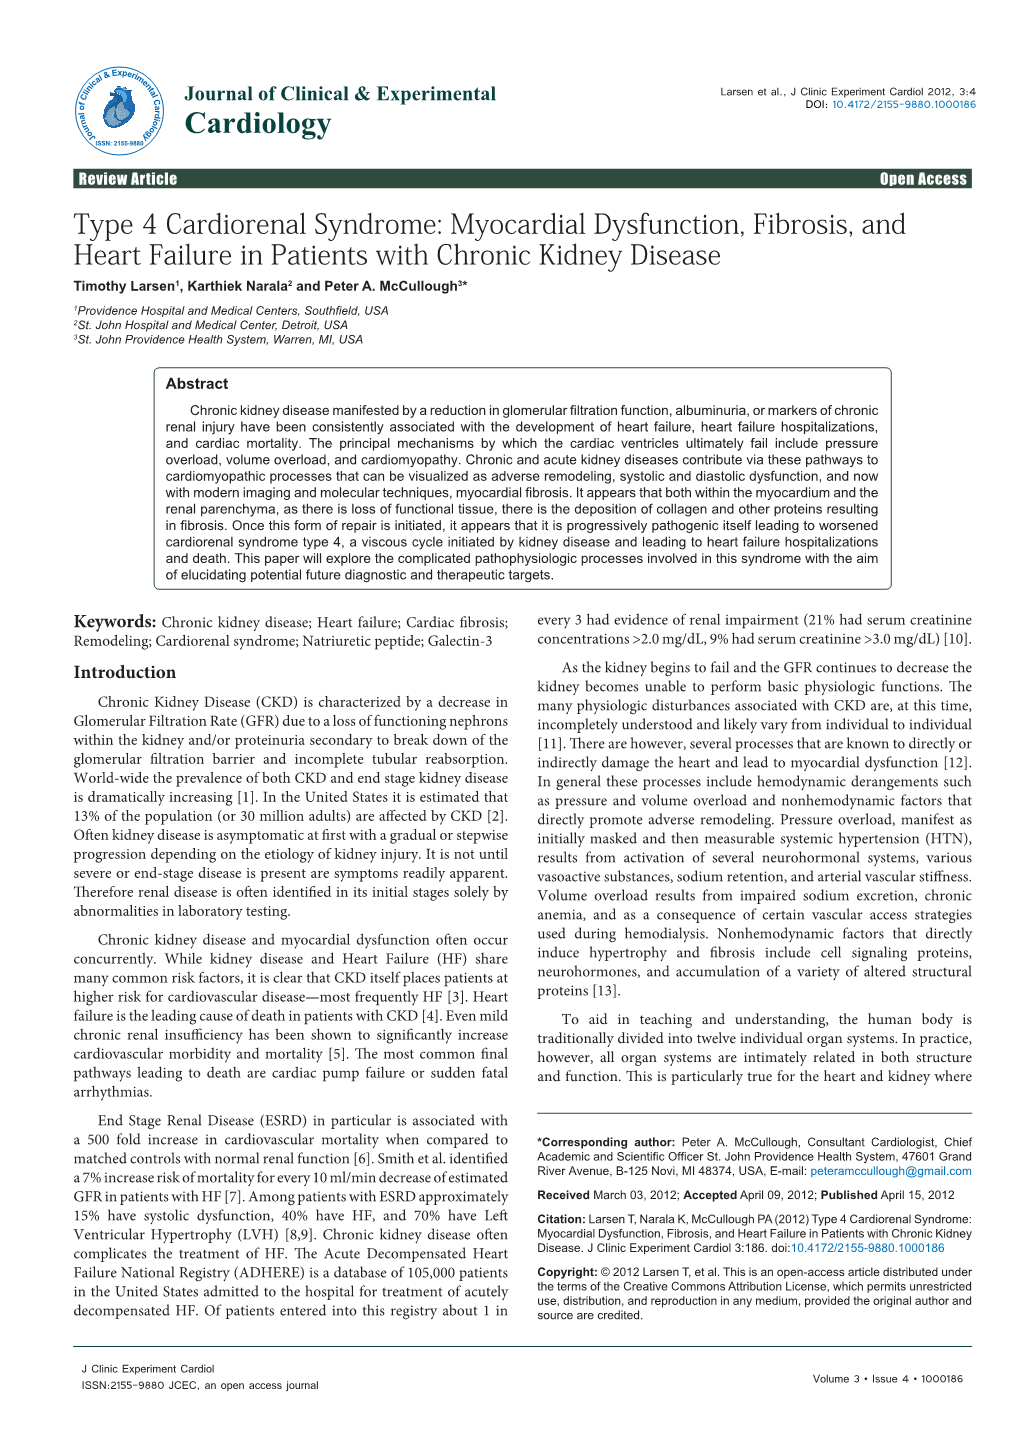 Type 4 Cardiorenal Syndrome: Myocardial Dysfunction, Fibrosis, and Heart Failure in Patients with Chronic Kidney Disease Timothy Larsen1, Karthiek Narala2 and Peter A